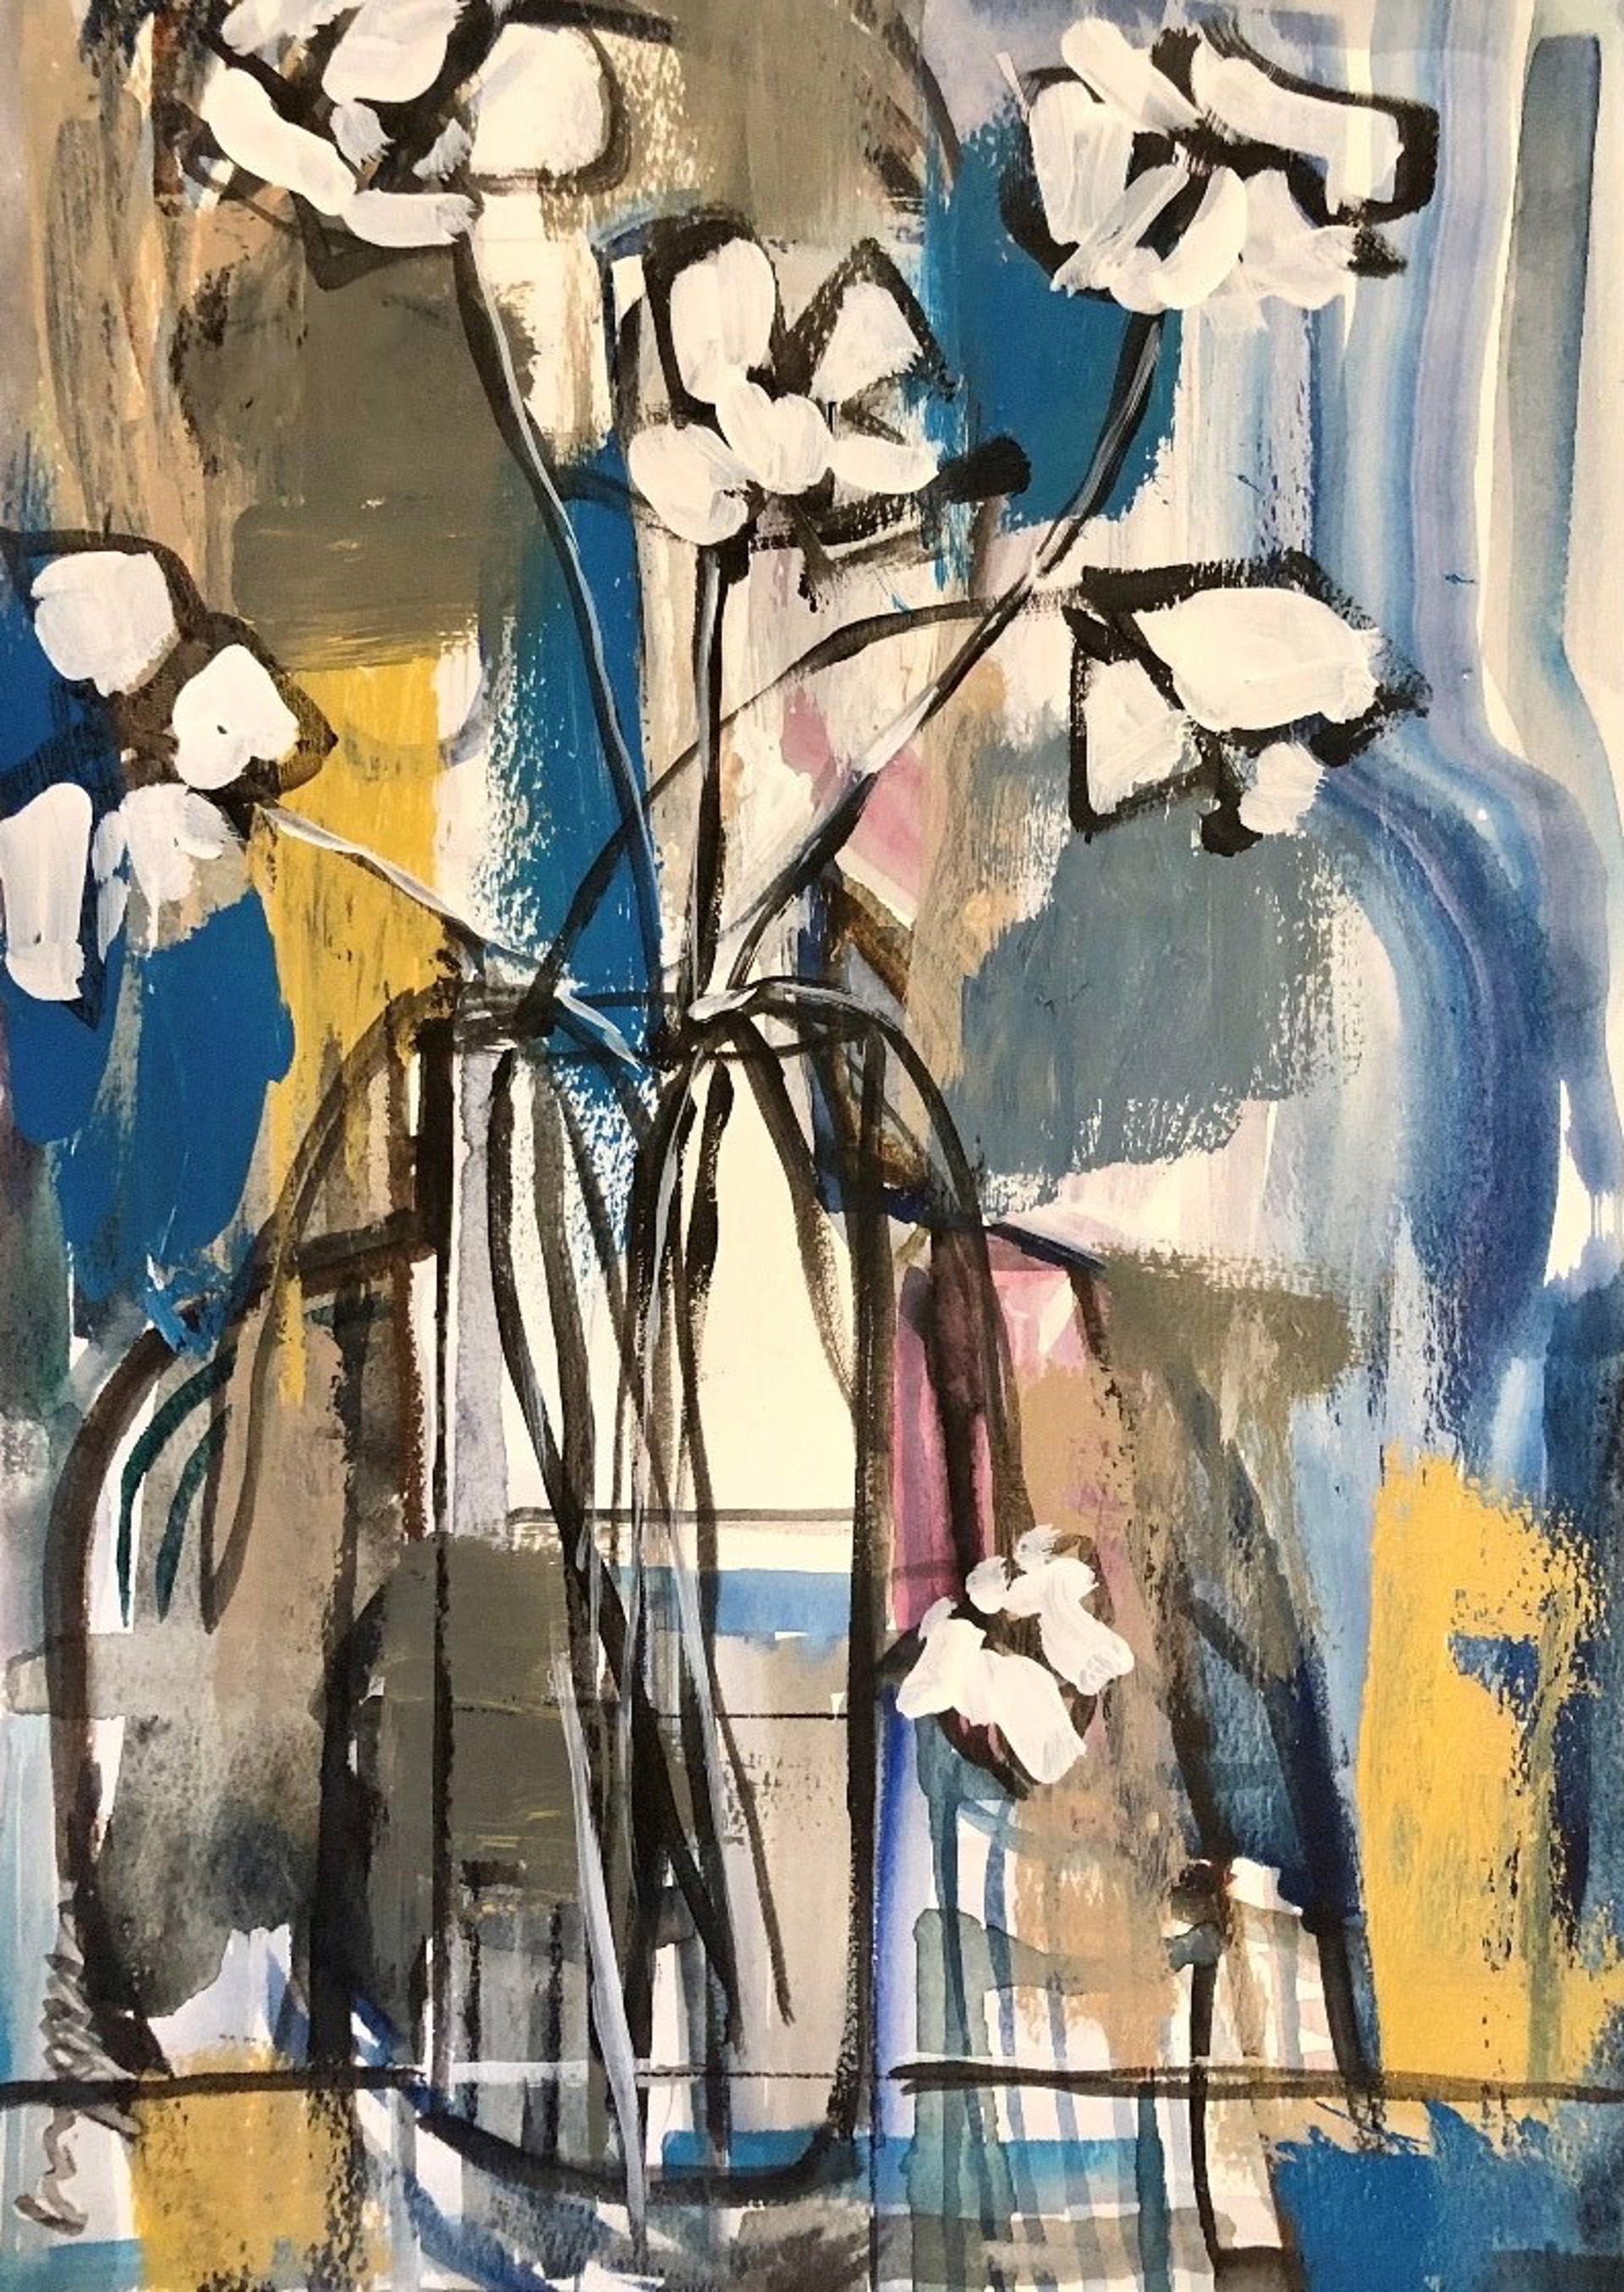 Her Flowers in a Vase by Craig Greene